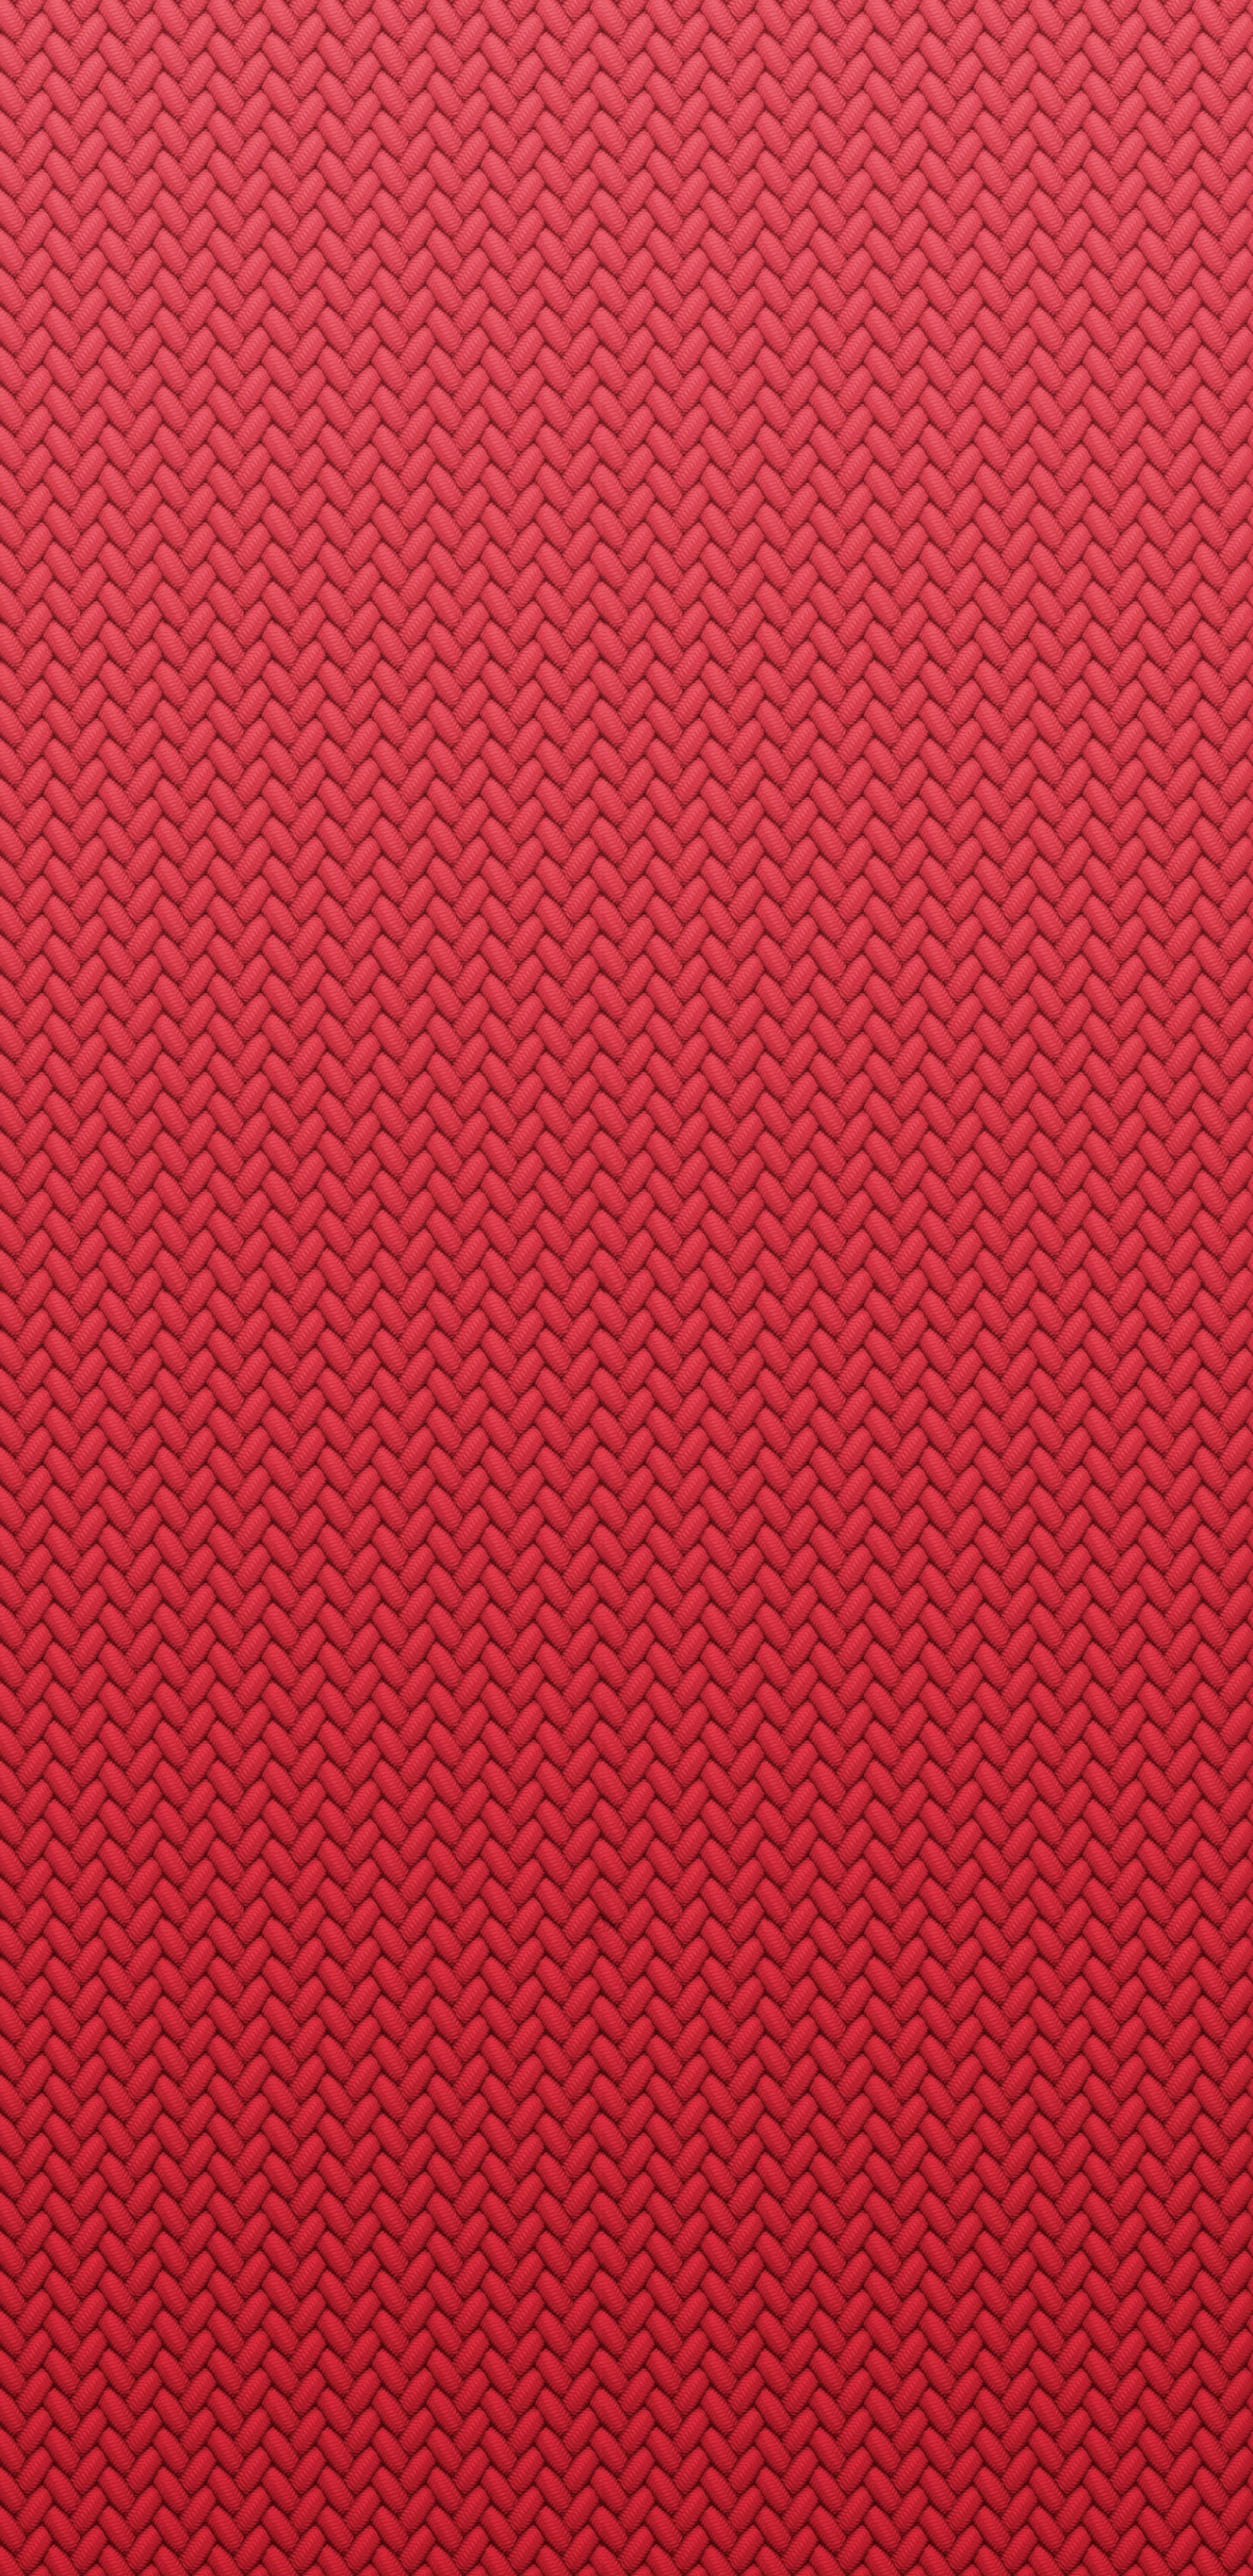 The Braided Solo Loop – Red 壁纸 1440x2960 允许